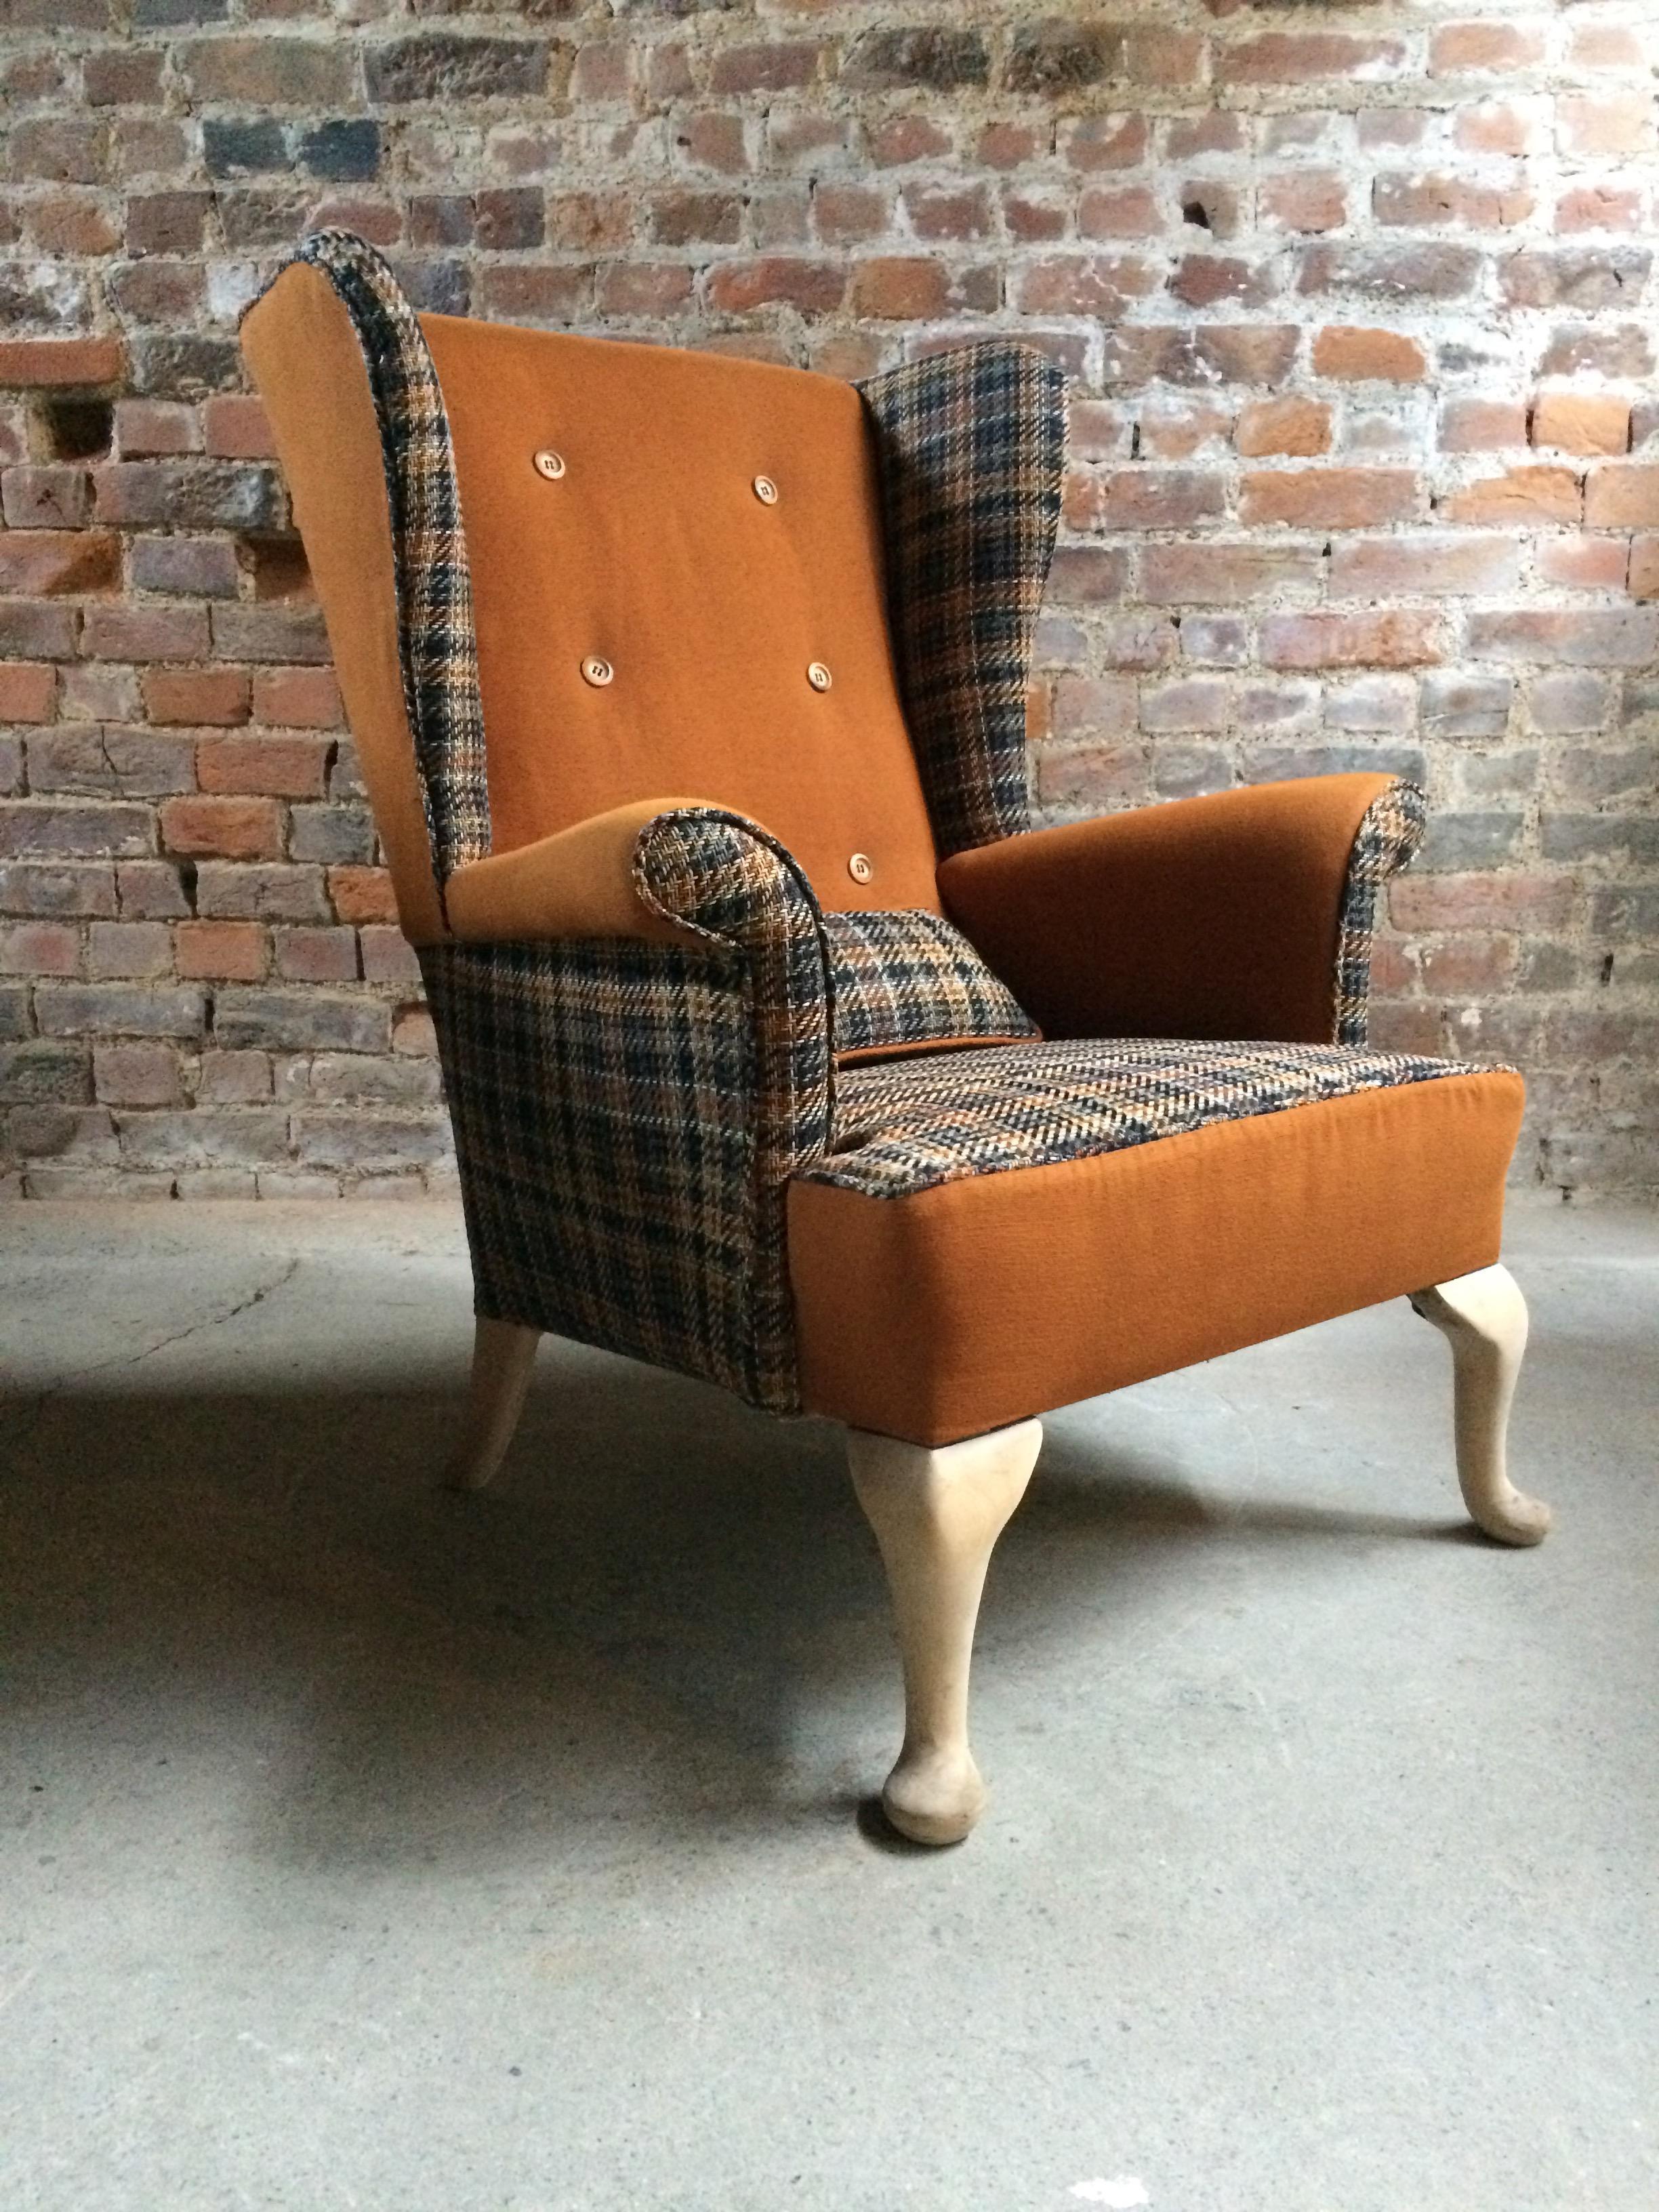 Mahogany Fabulous Armchairs Pair the Thunderbird Parker Knoll Fireside Wing Chair Bespoke